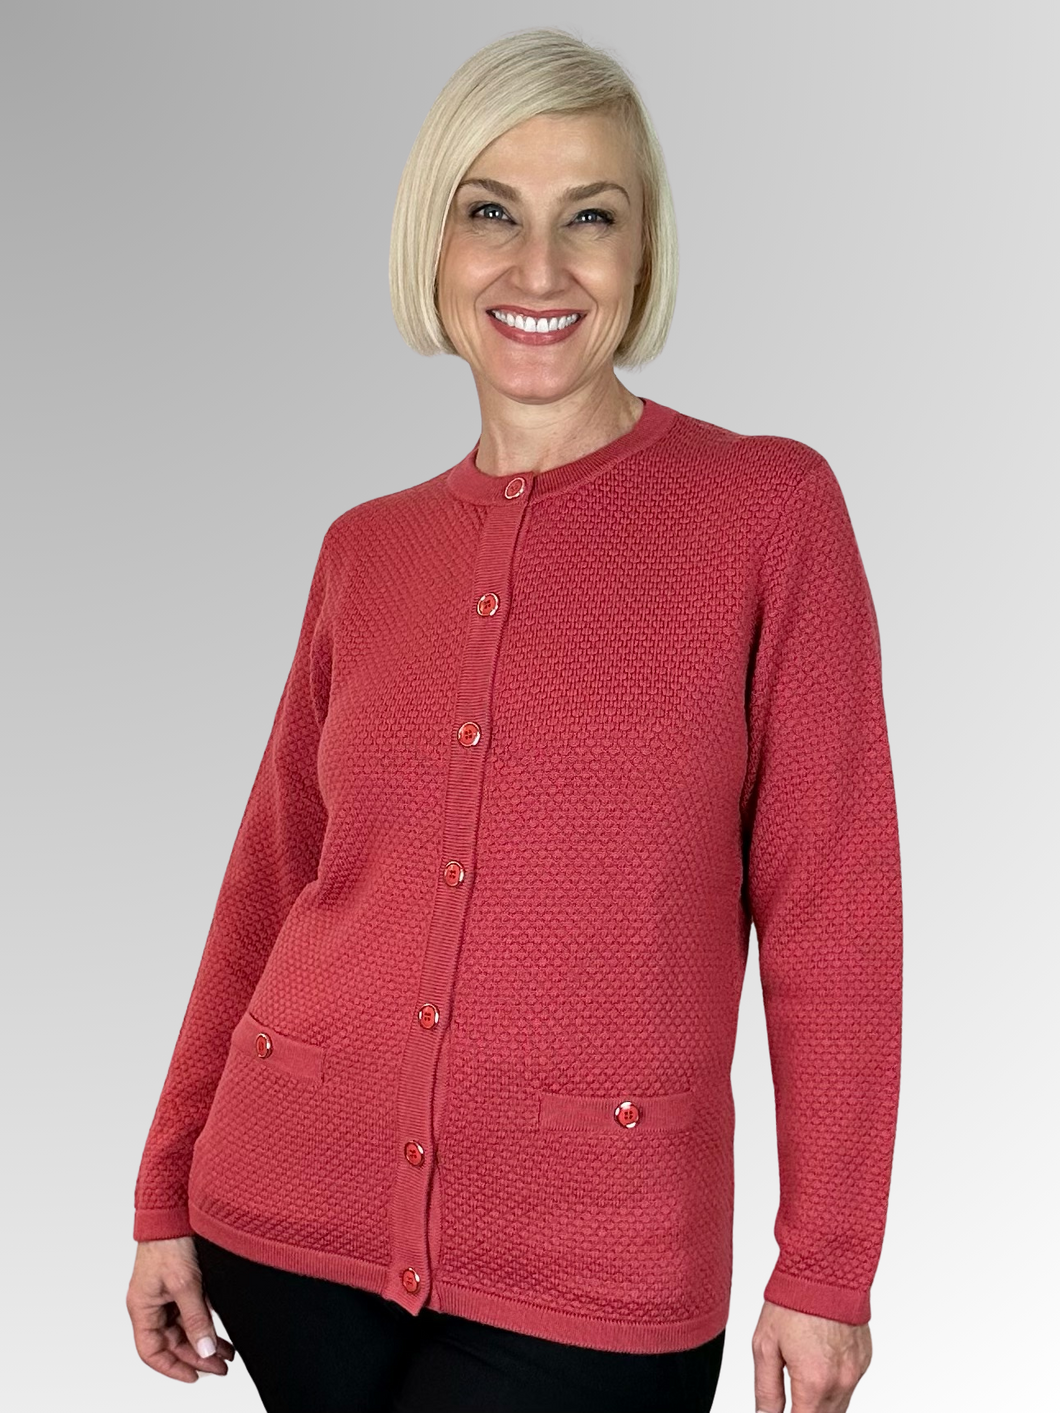 With over 70 years of experience in designing and crafting high-quality women's knitwear, Slade Knitwear is a renowned Australian brand. Made from 100% Pure Wool, their Spice Bubble Stitch Cardigan, complete with two pockets, is a timeless and luxurious addition to any winter wardrobe. Trust in Slade for the best in winter fashion.